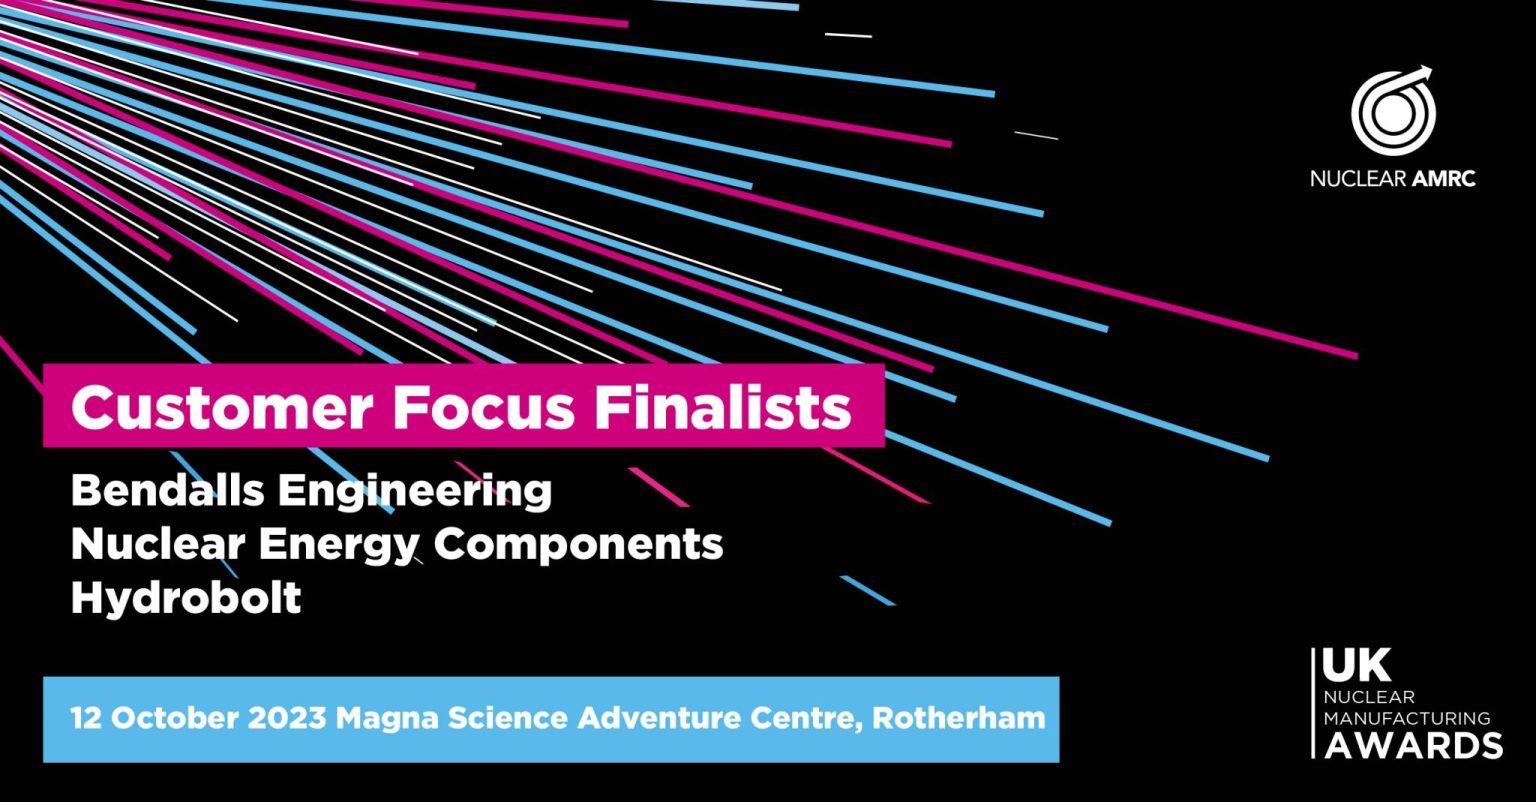 Nuclear Manufacturing Awards Finalist!